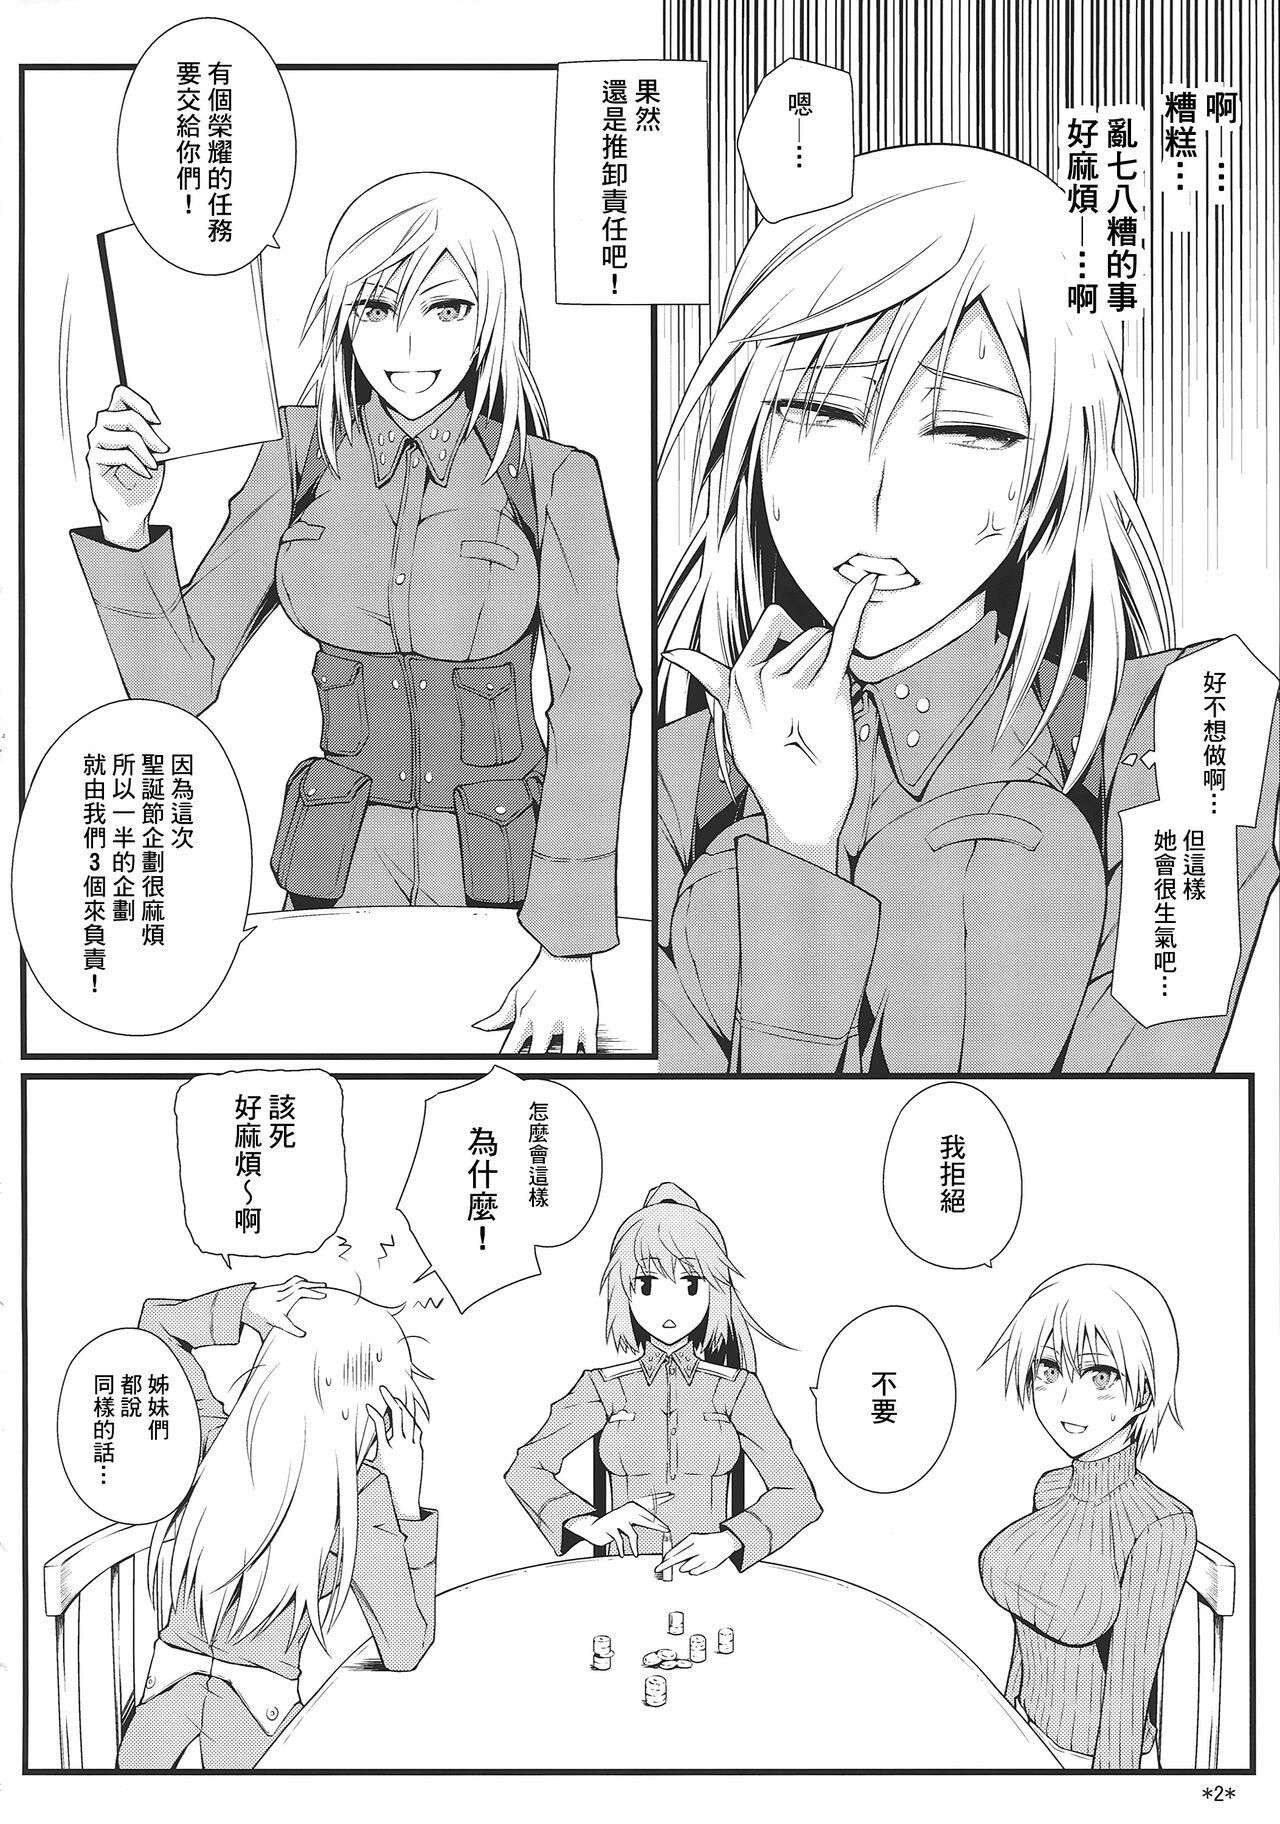 Camwhore KARLSLAND SYNDROME 3 - Strike witches Online - Page 4